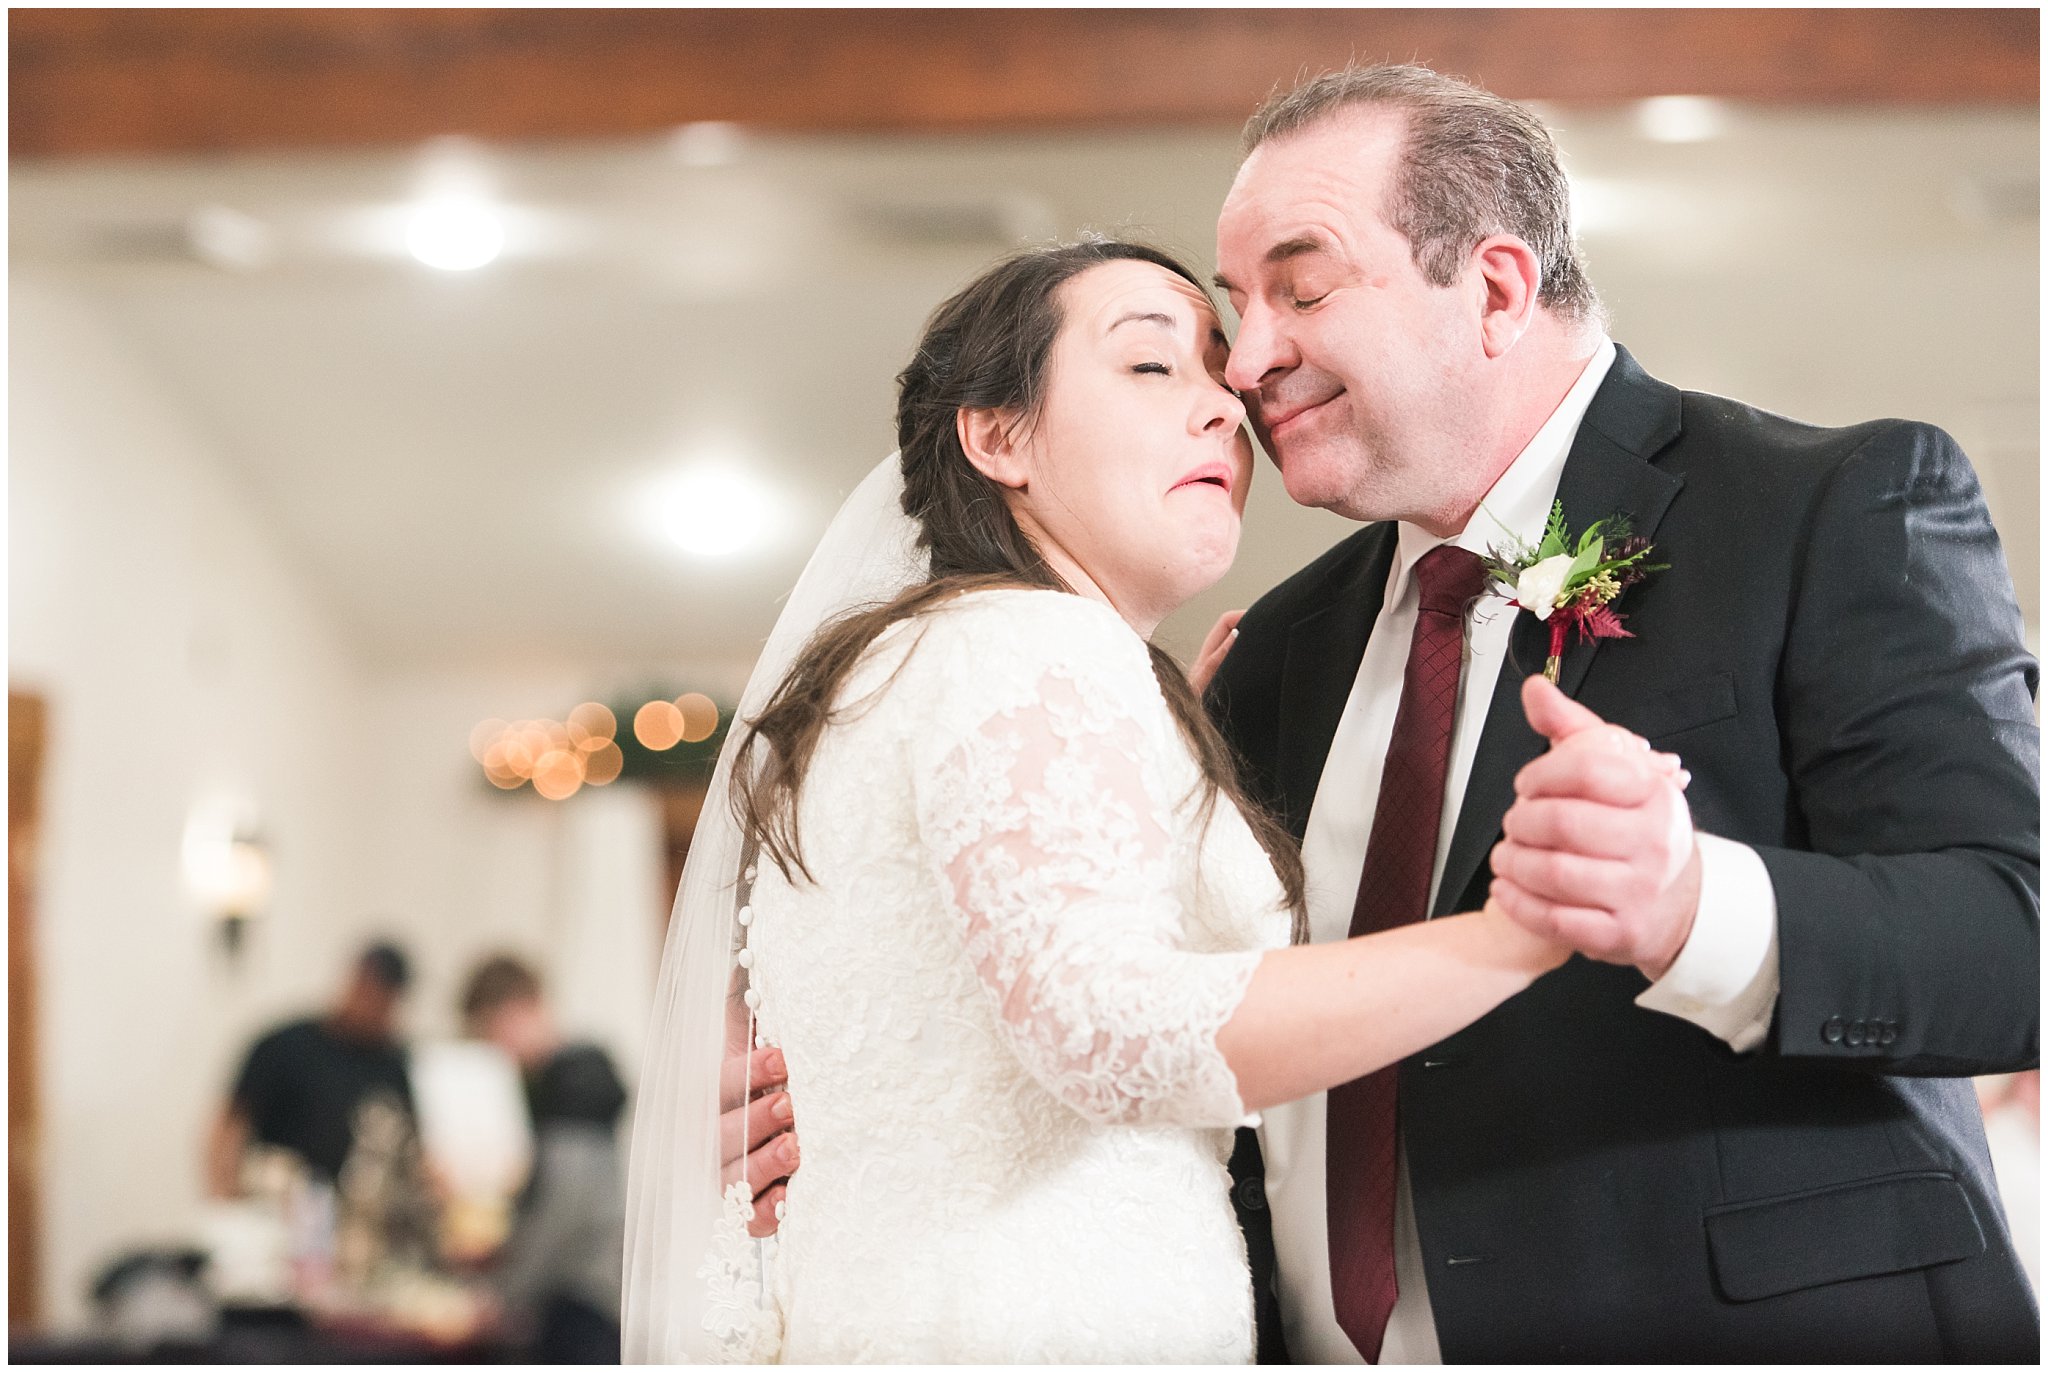 Father Daughter dance at the Gathering Place at Gardner Village | Gardner Village Wedding | The Gathering Place | Jessie and Dallin Photography